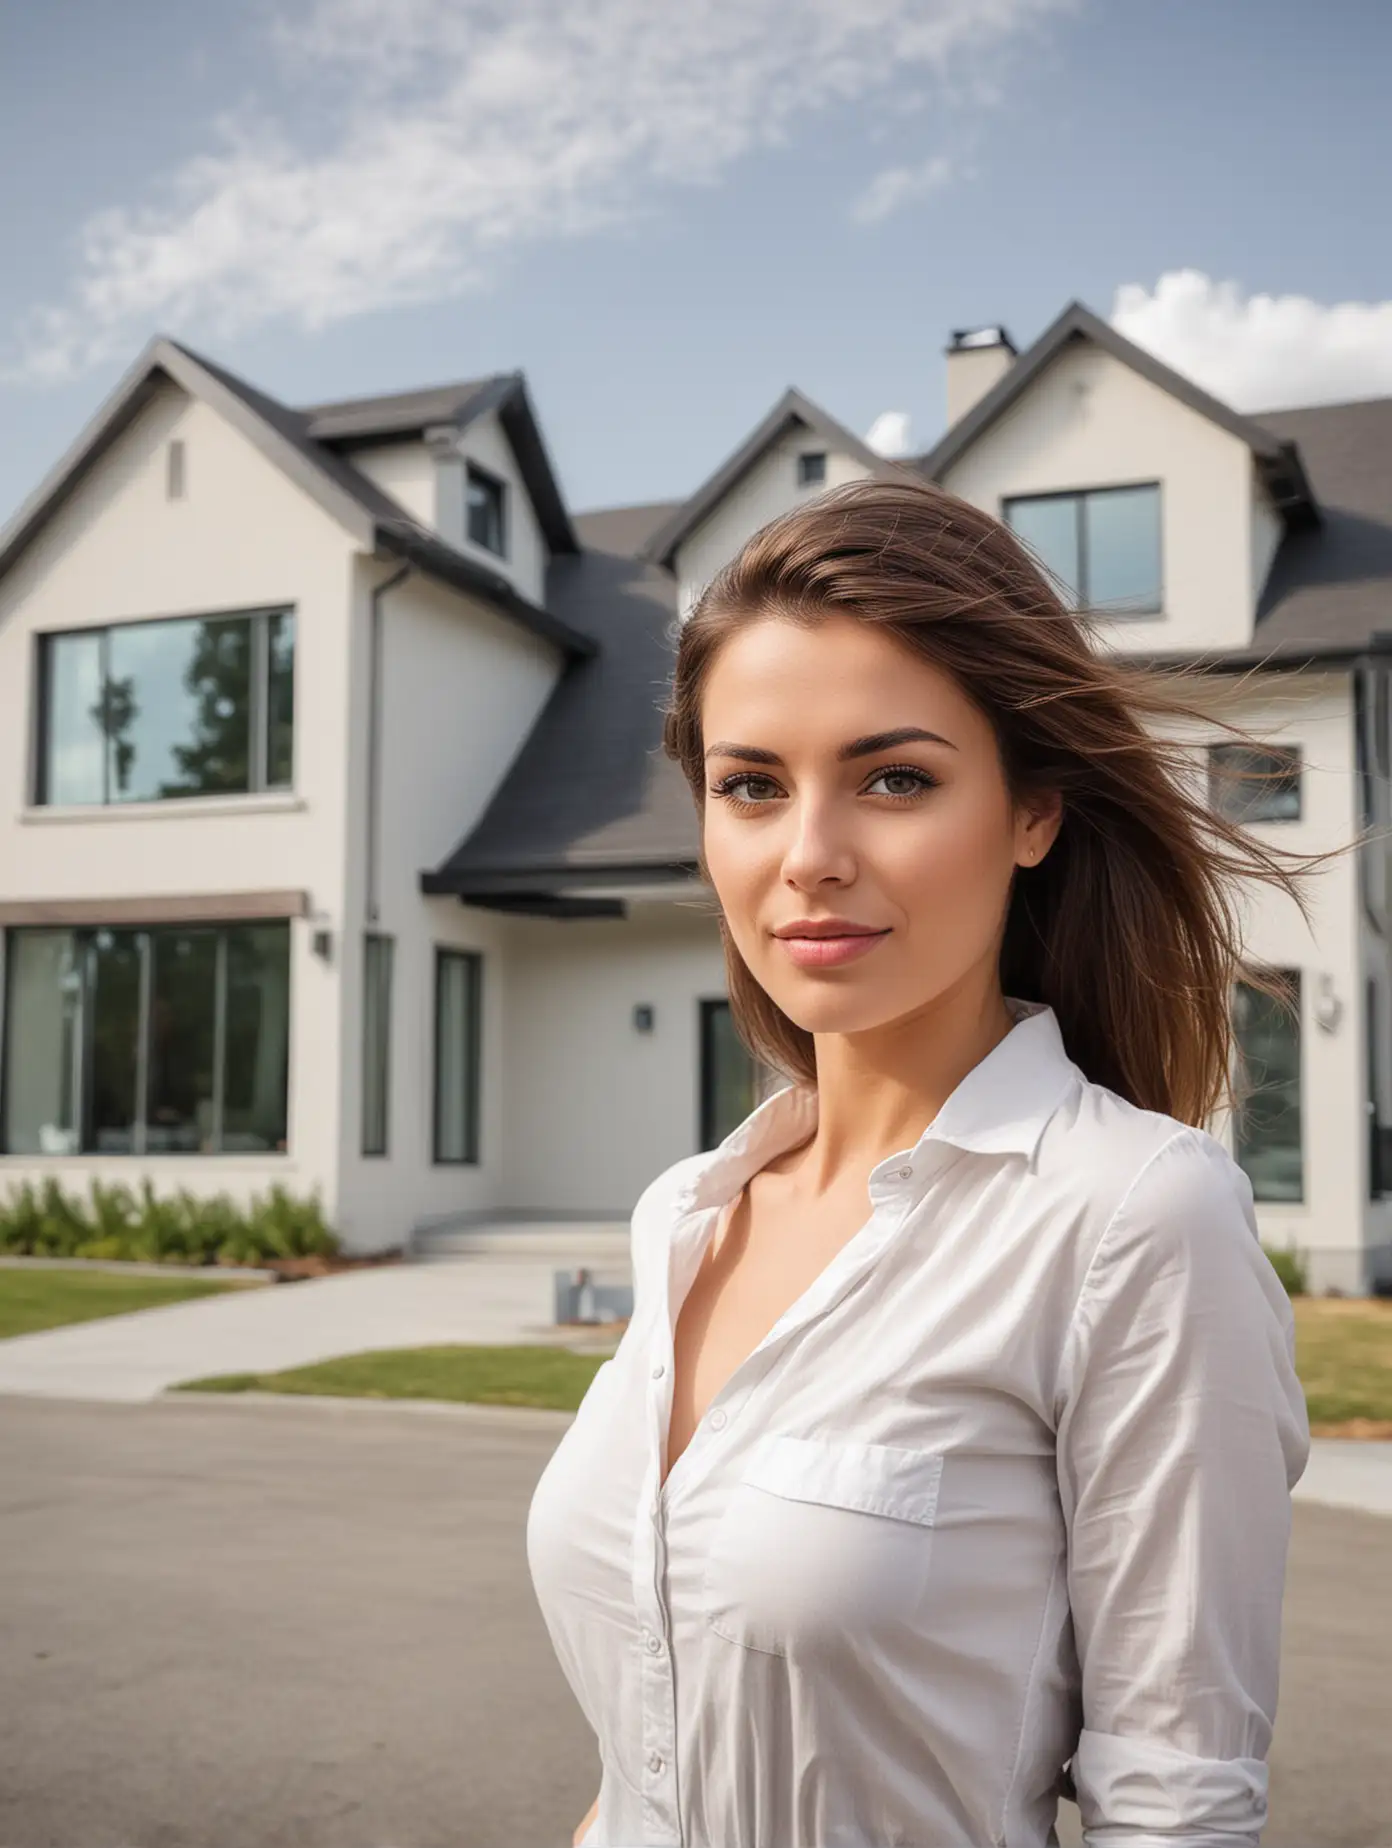 Stylish Woman Posing with Modern House in Background